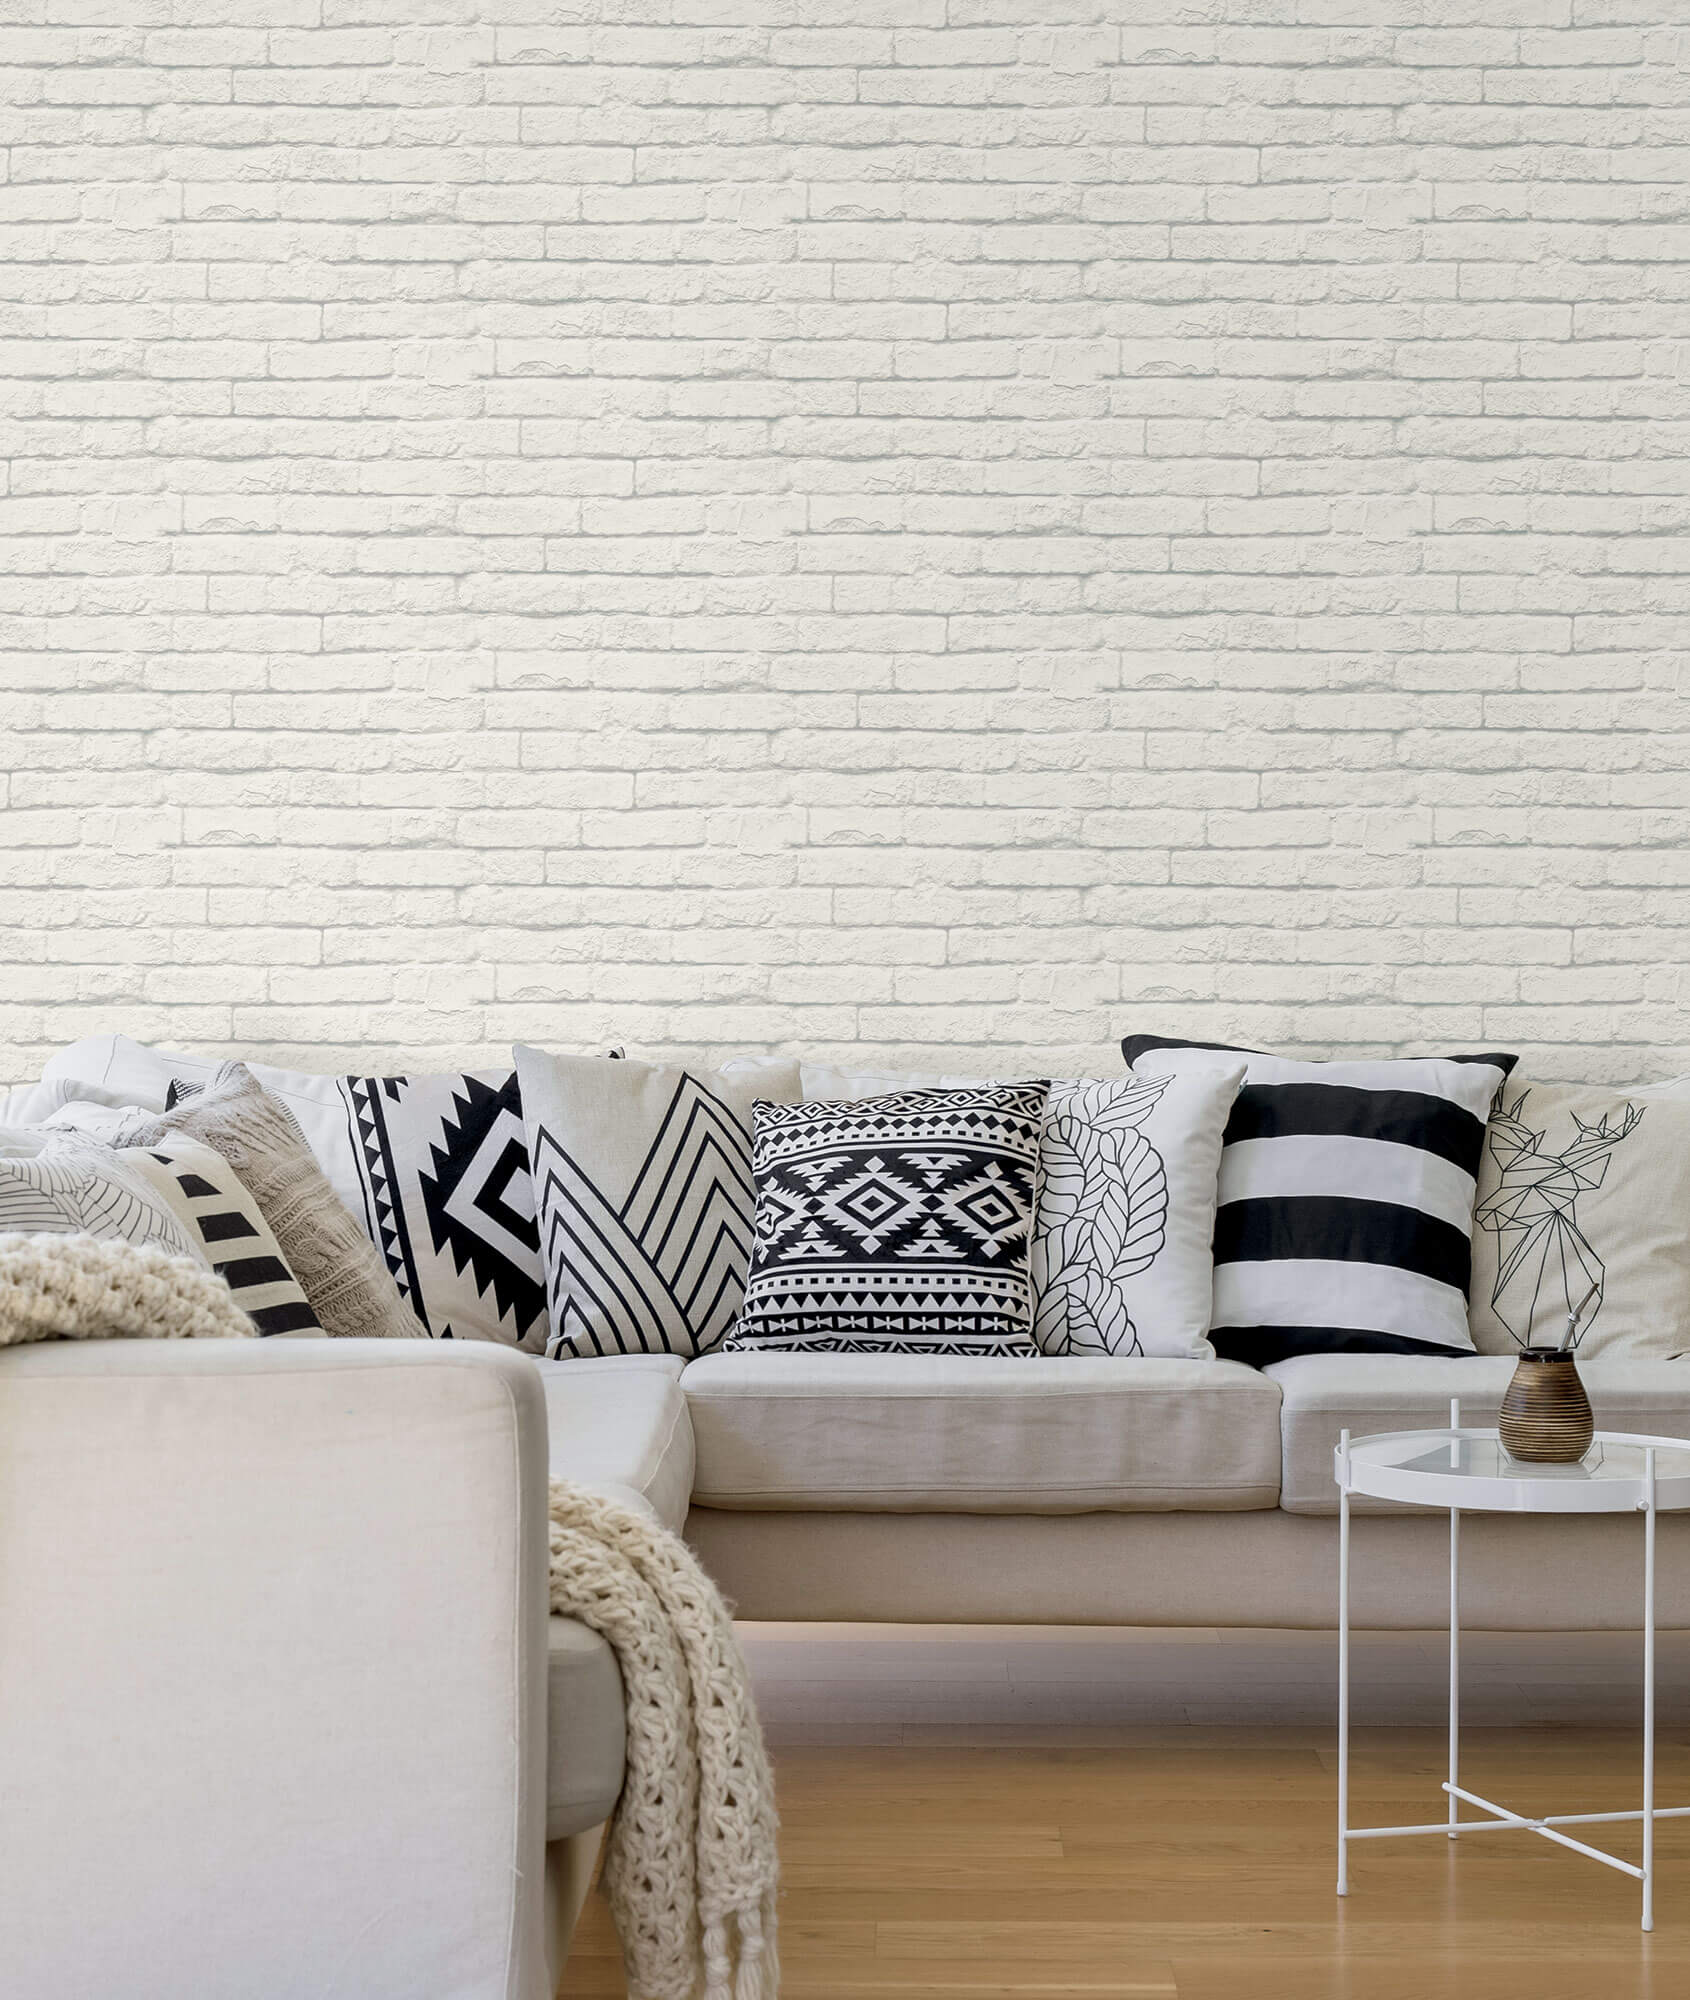 Nu1653 Gray And White Brick Peel And Stick Wallpaper  Fruugo IN